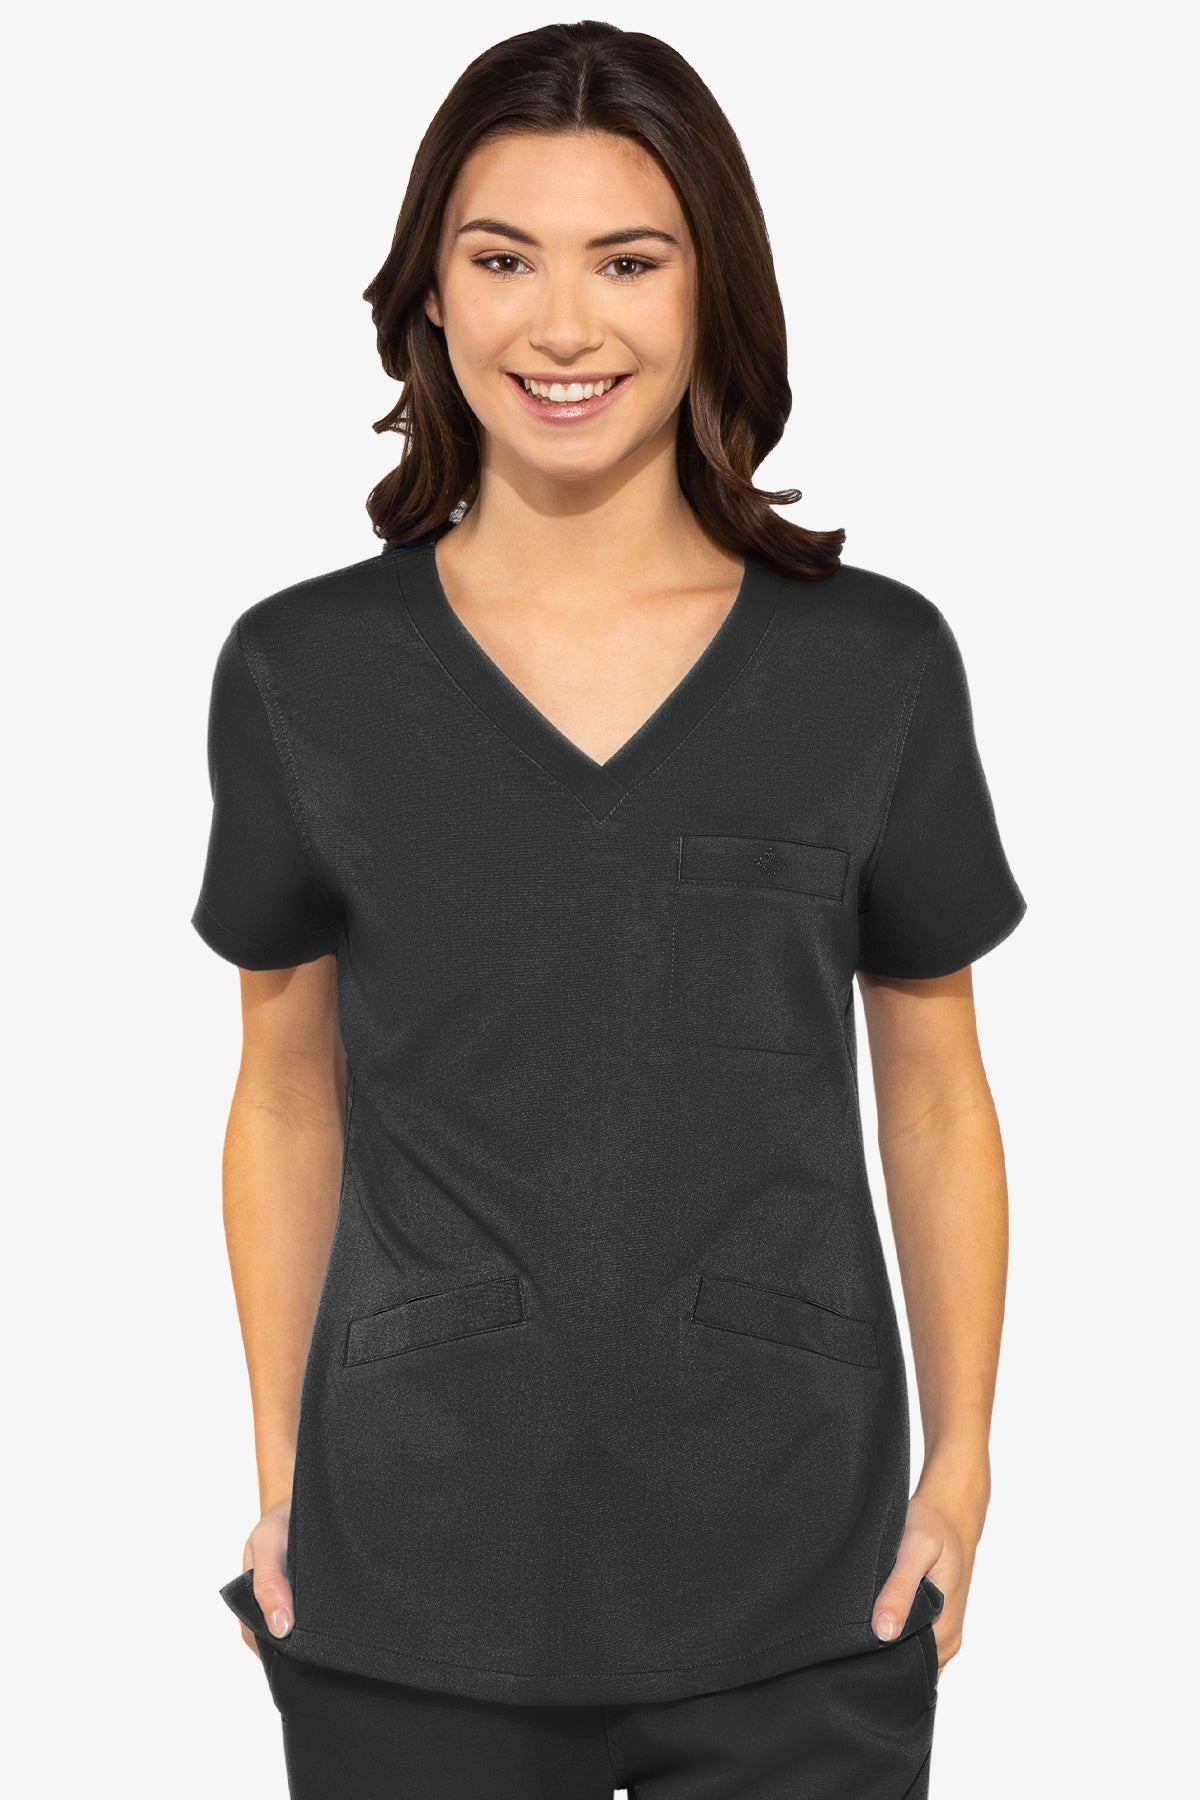 Med Couture Scrub Top Touch Classic V-Neck in Black at Parker's Clothing and Shoes.